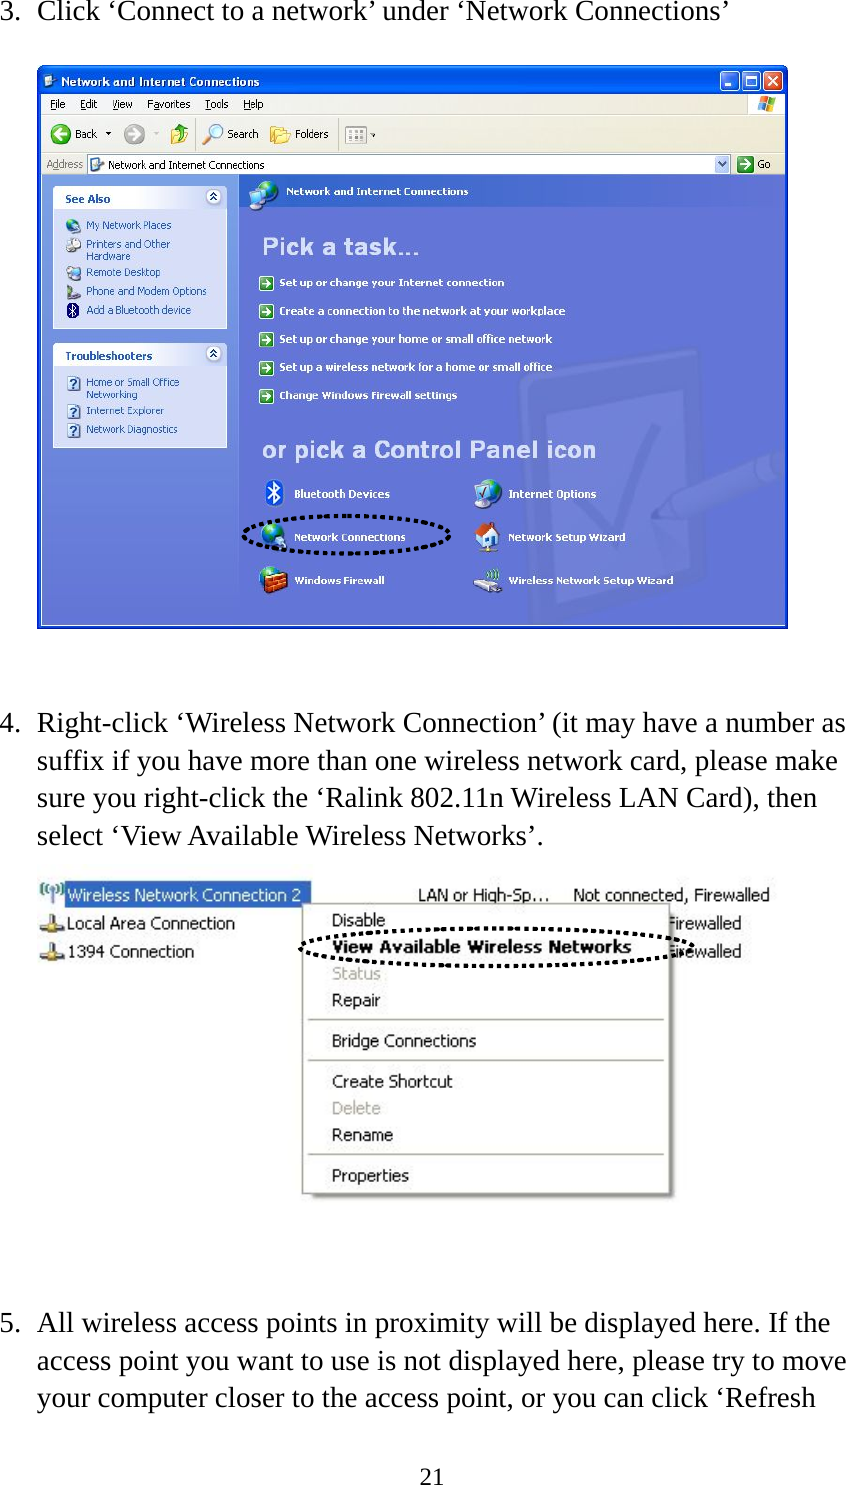  213. Click ‘Connect to a network’ under ‘Network Connections’     4. Right-click ‘Wireless Network Connection’ (it may have a number as suffix if you have more than one wireless network card, please make sure you right-click the ‘Ralink 802.11n Wireless LAN Card), then select ‘View Available Wireless Networks’.    5. All wireless access points in proximity will be displayed here. If the access point you want to use is not displayed here, please try to move your computer closer to the access point, or you can click ‘Refresh 